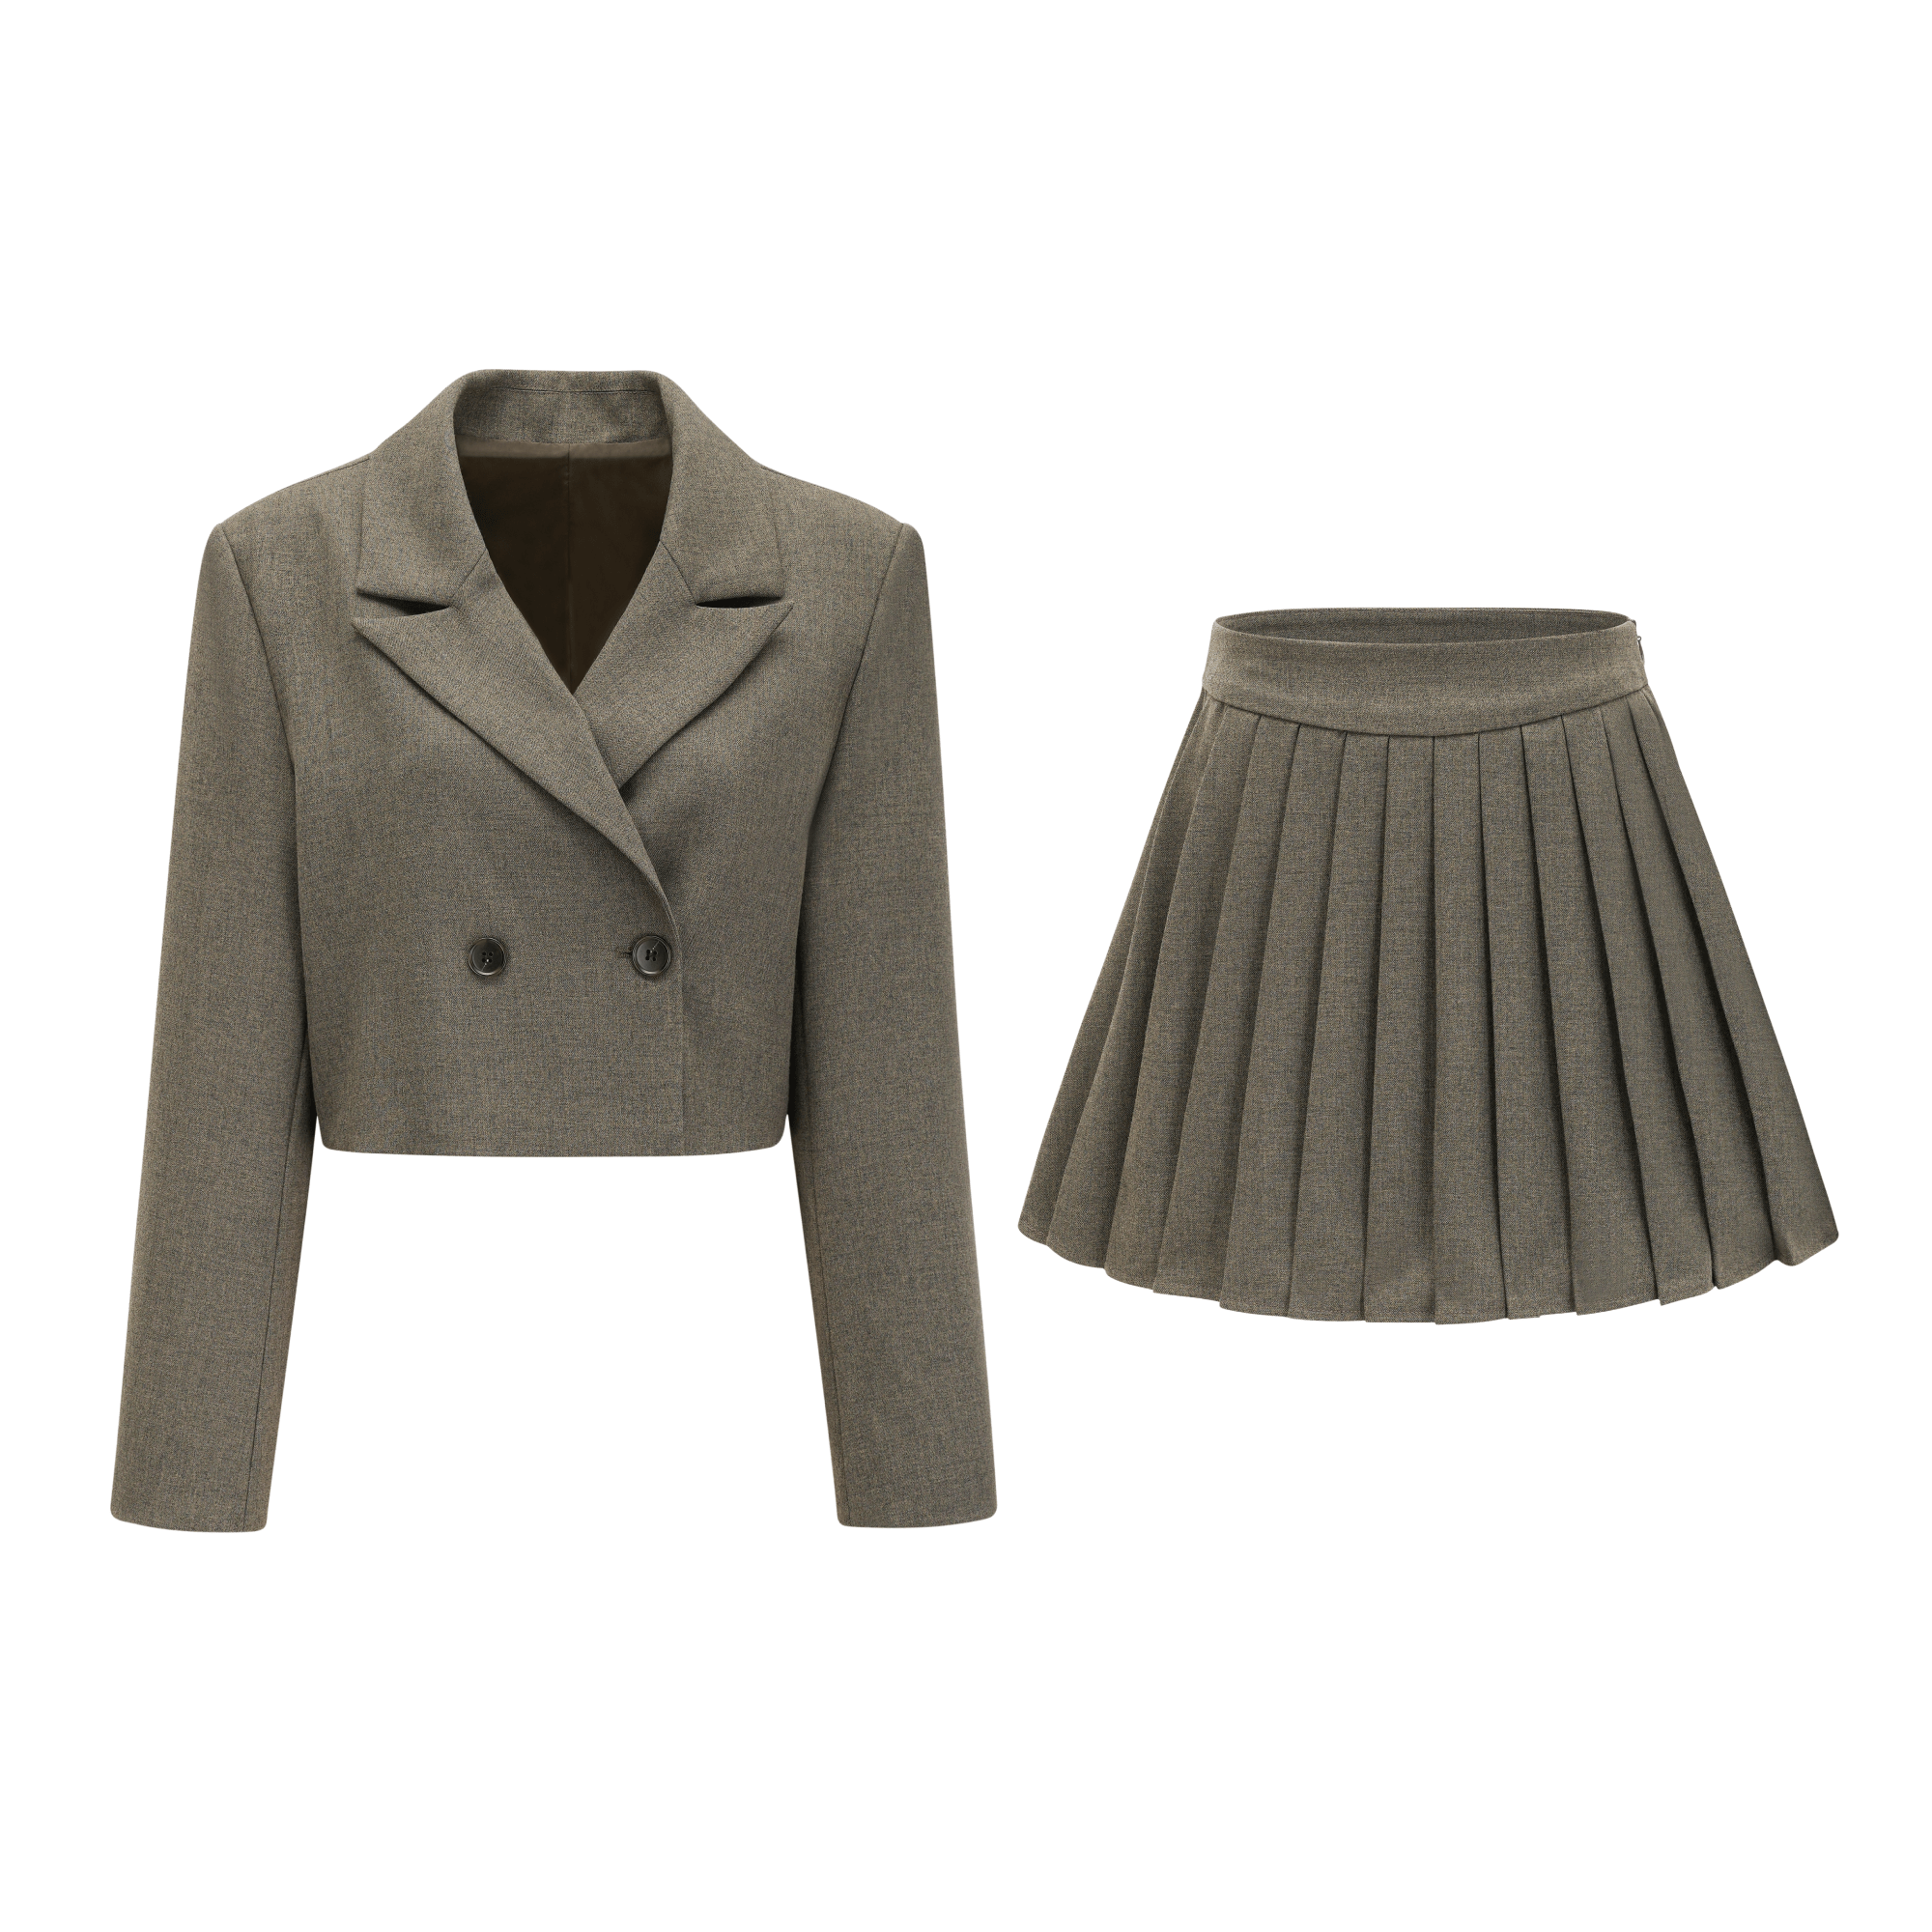 Atrovirens cropped jacket & pleated skirt matching set - Miss Rosier - Women's Online Boutique